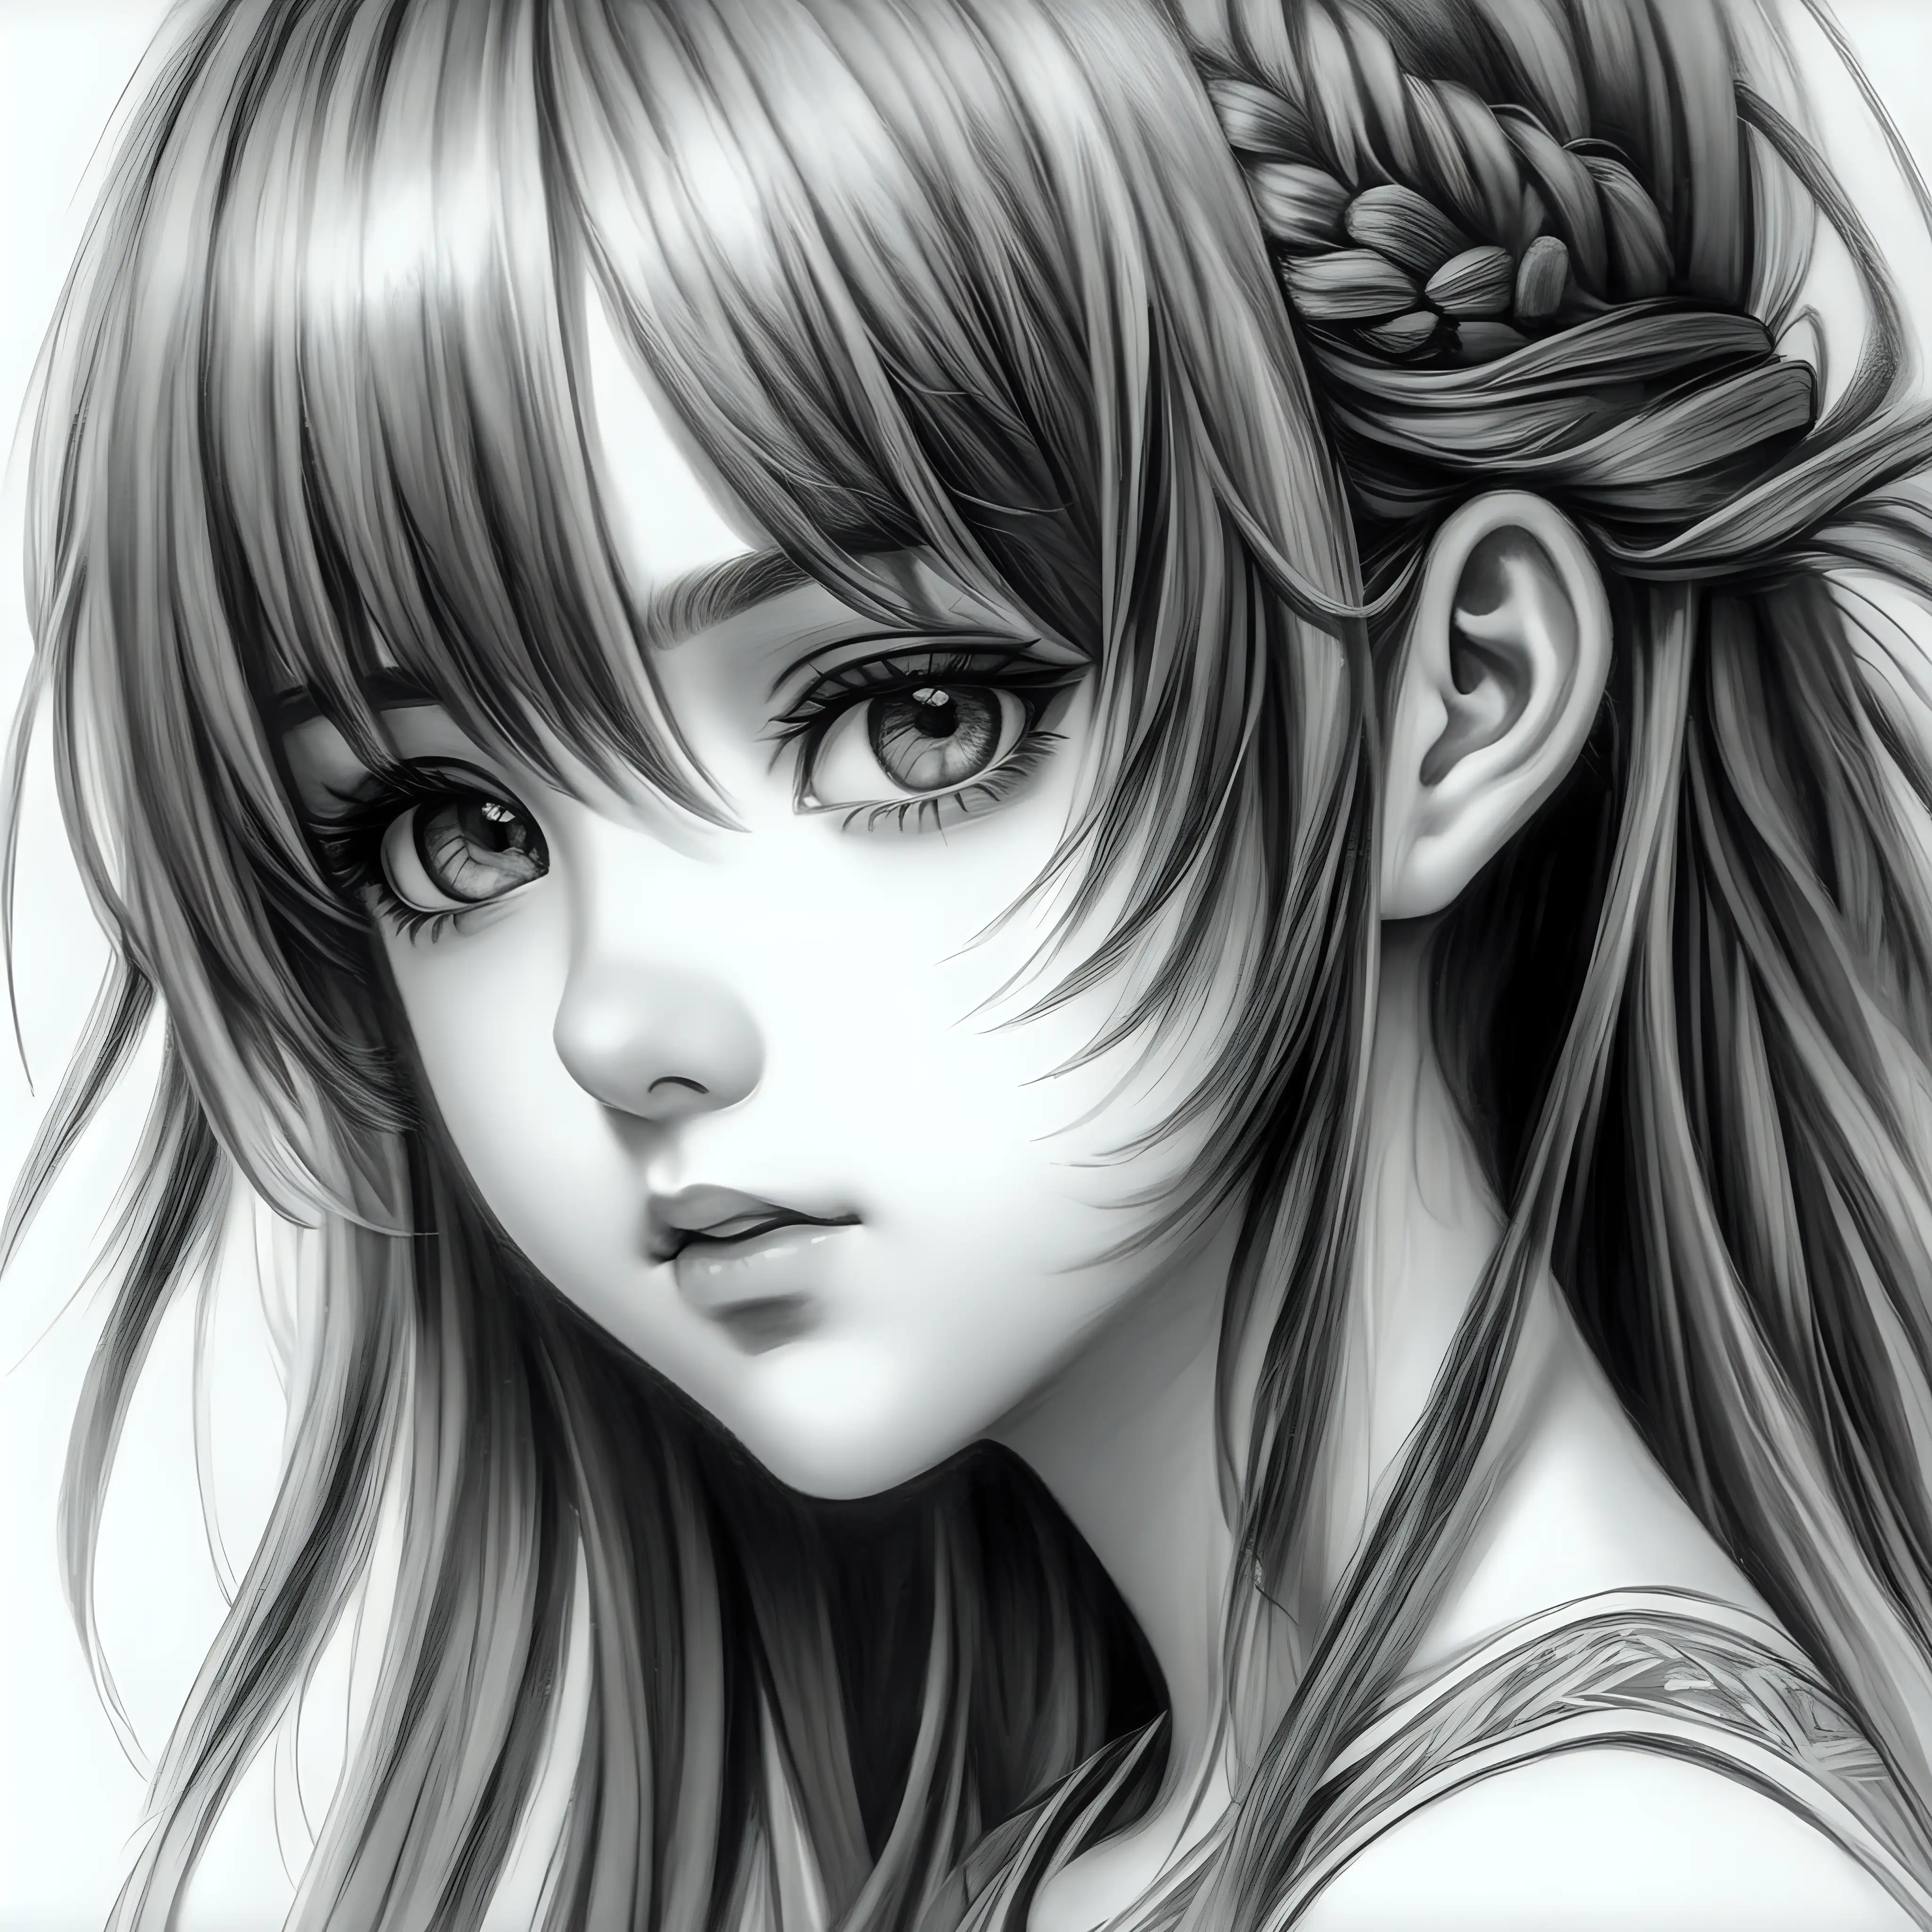 Charcoal Portrait of a Beautiful Anime Girl with Delicate Features and Expressive Eyes